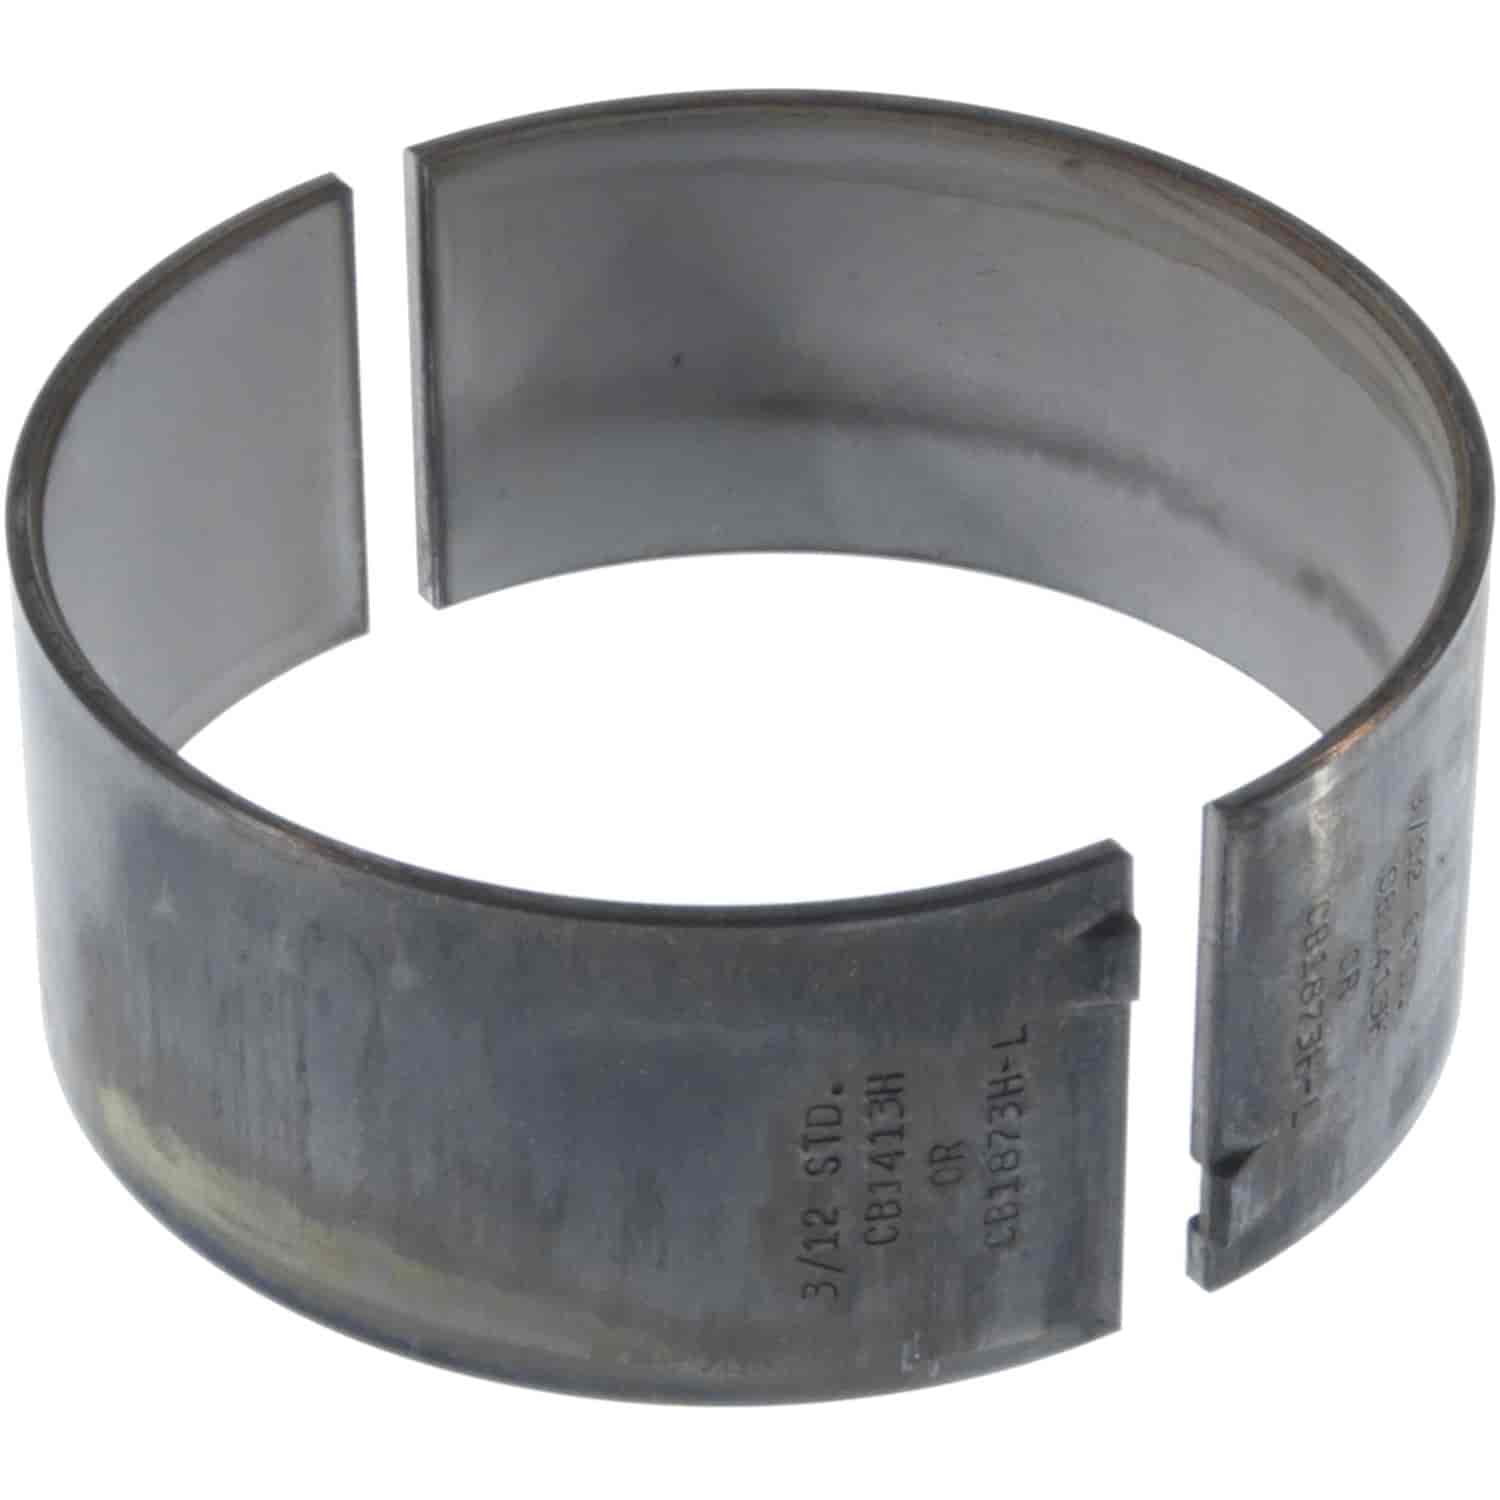 Connecting Rod Bearing Fits Cummins Diesel 1989-2002 4B 3.9L/6B 5.9L Non-Fractured Rod with -.026mm Undersize